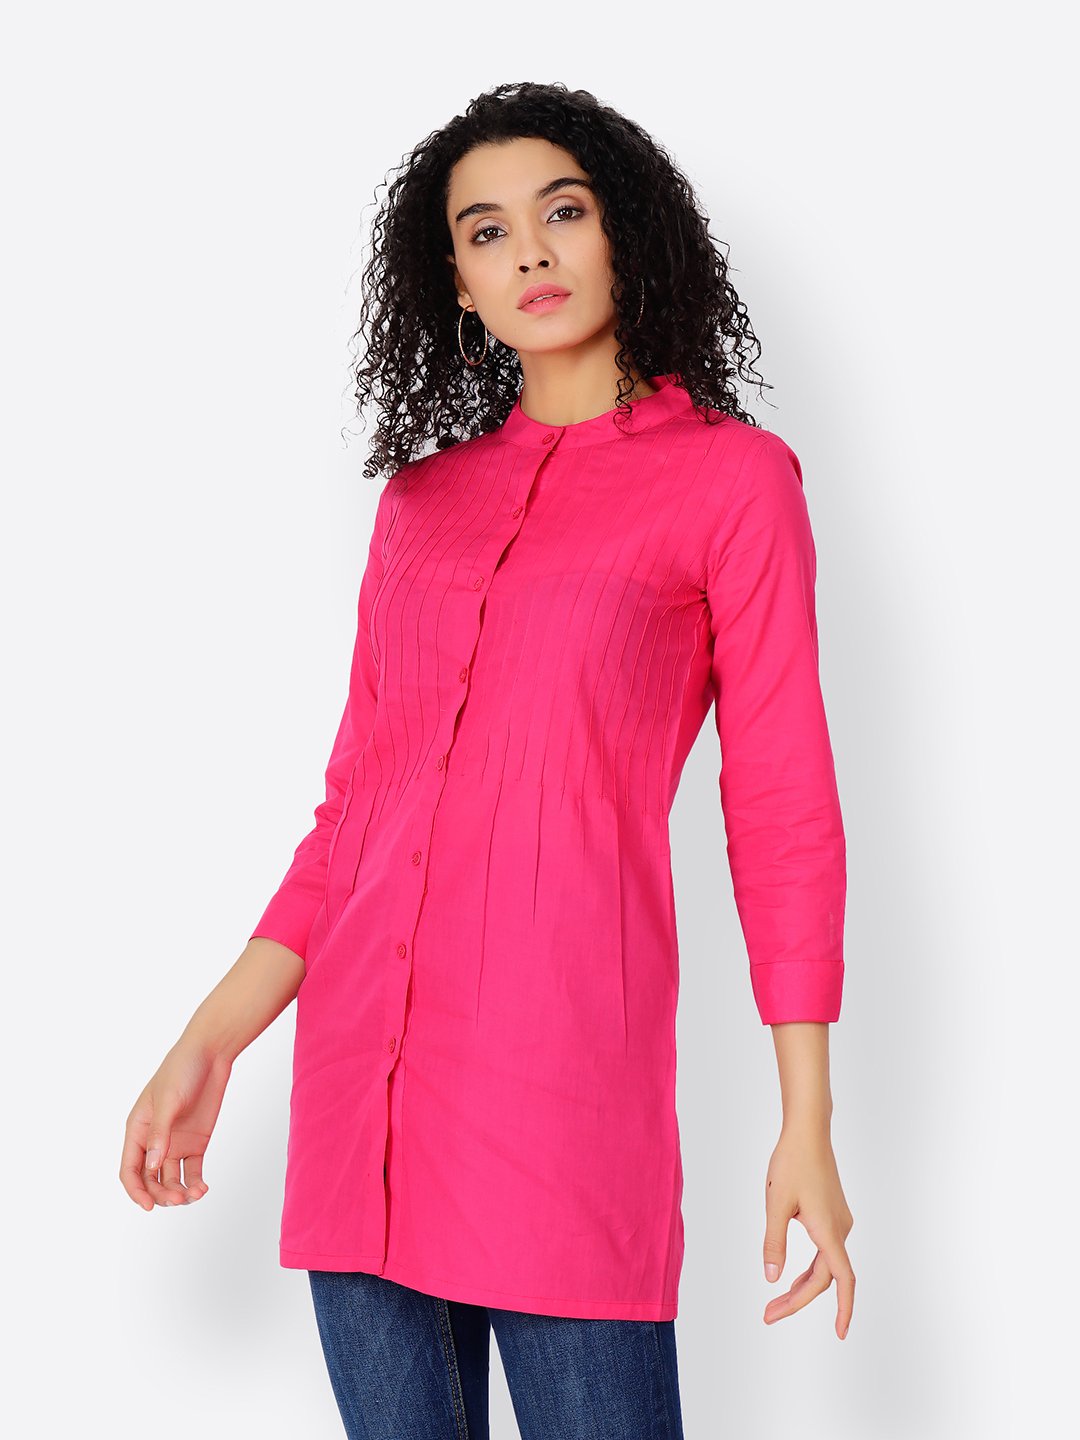 Cation Pink Tunic